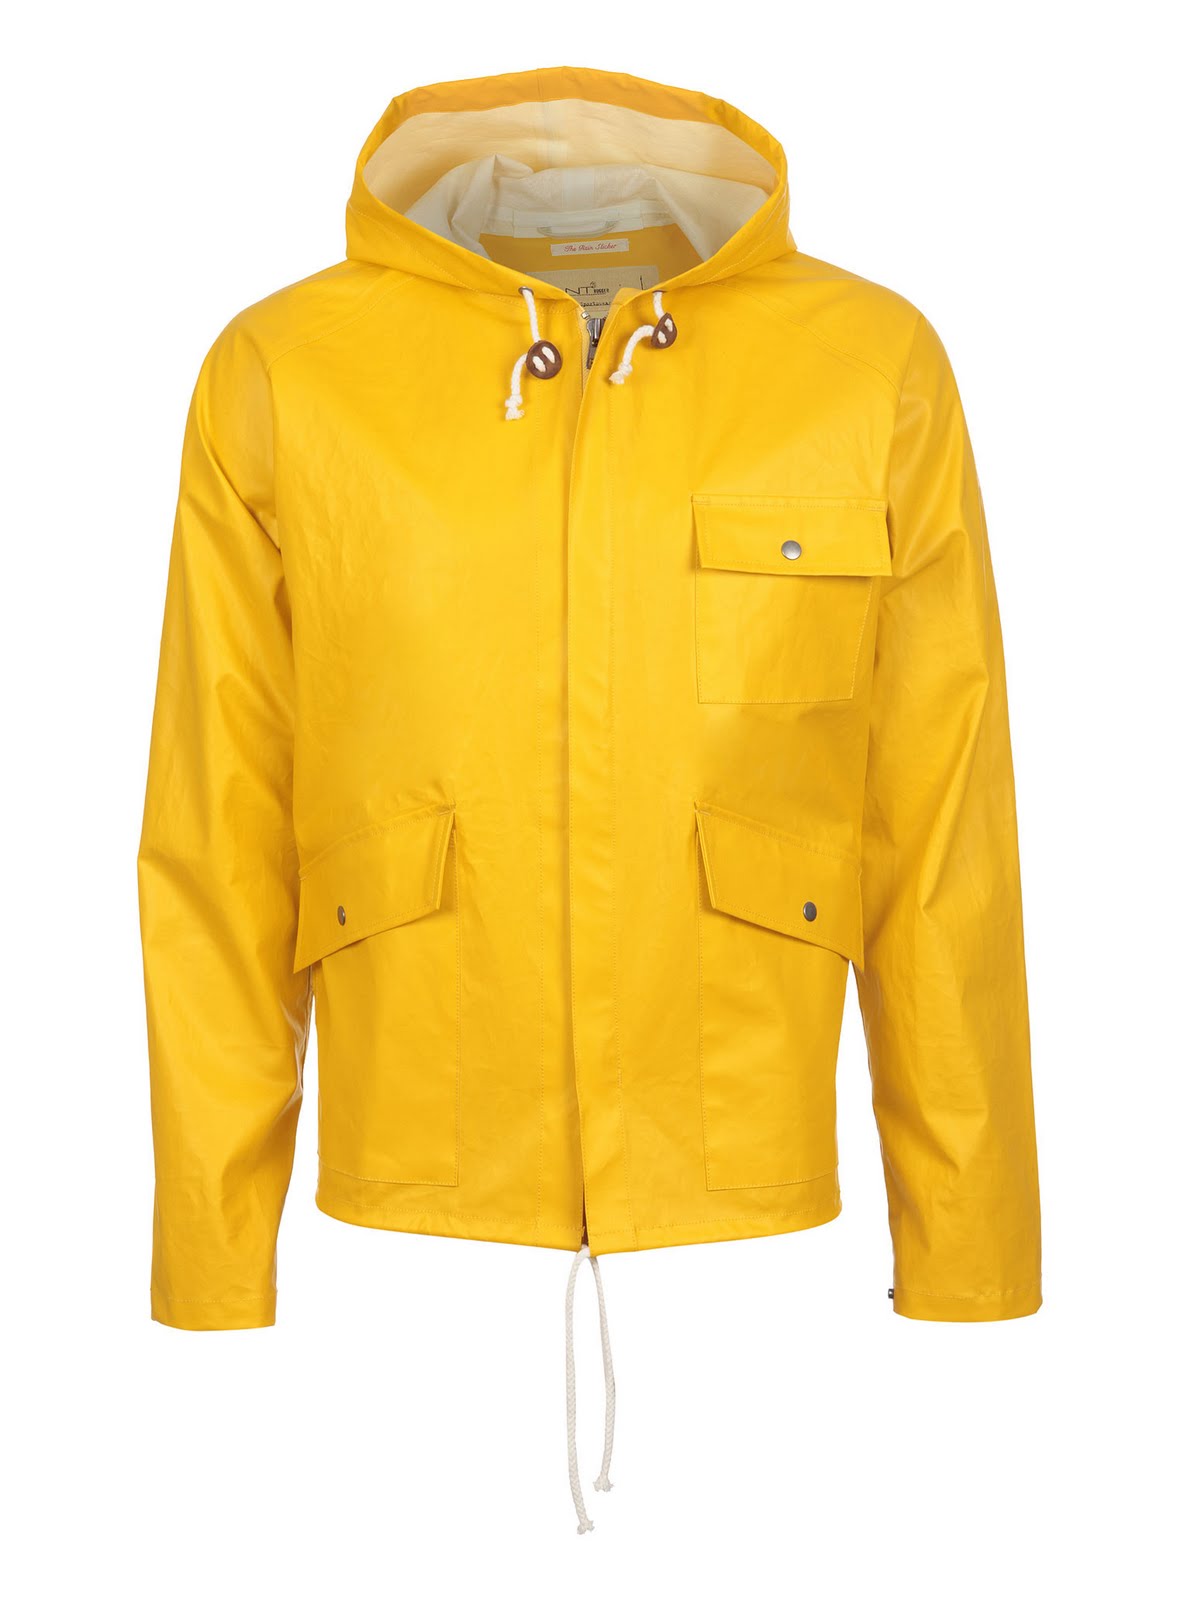 All Tied Up: yellow raincoat